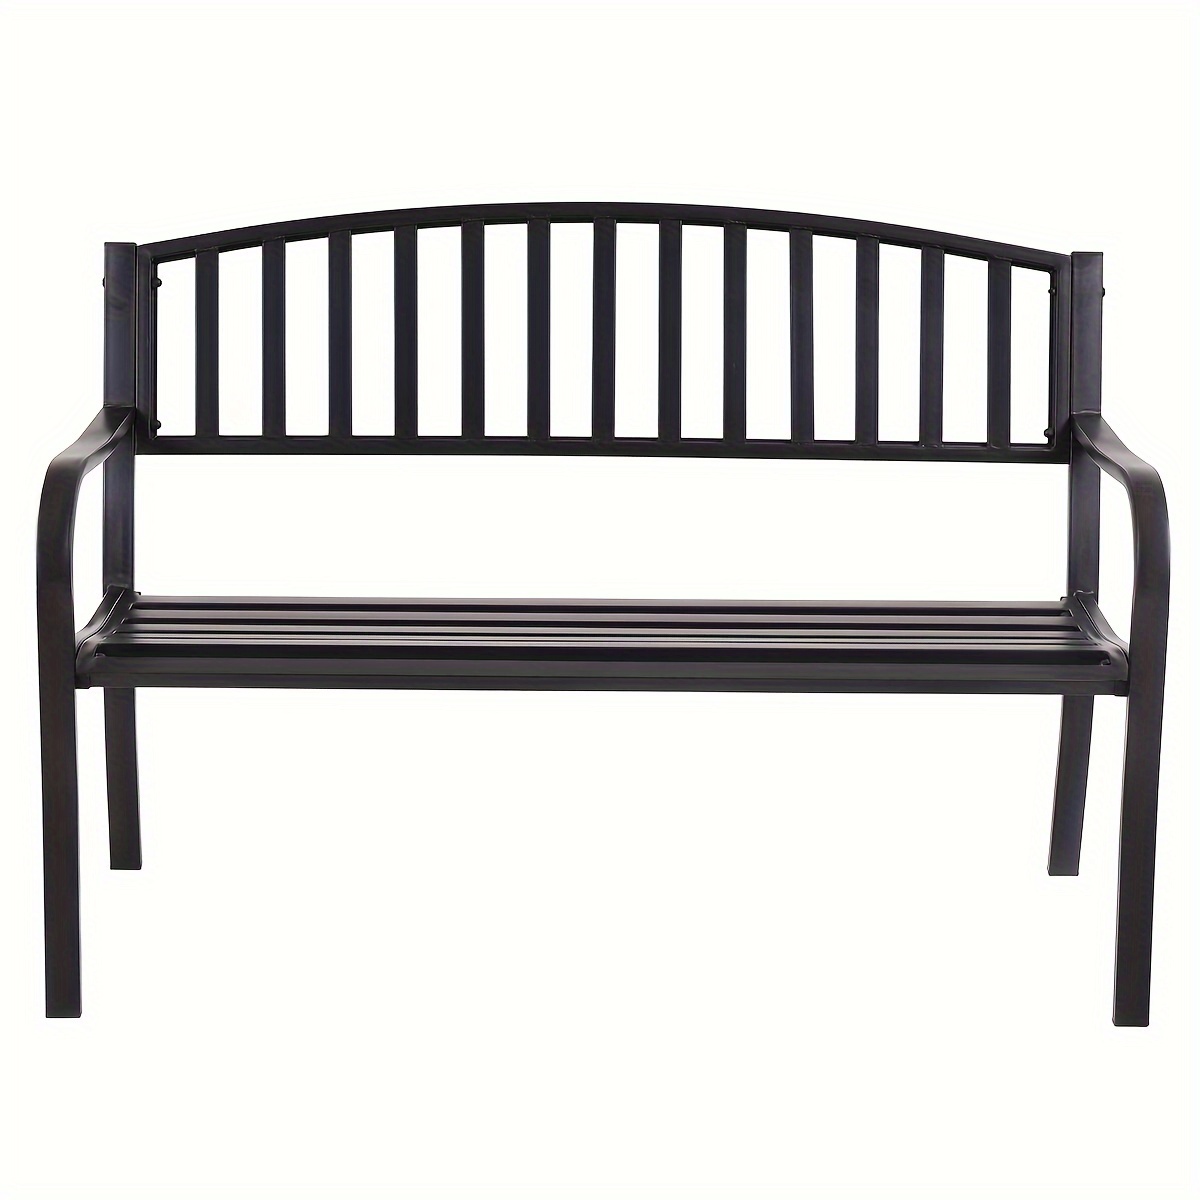 

Costway 50" Patio Chair For Garden Bench Park Yard, Outdoor Furniture Steel Slats Porch Chair Seat